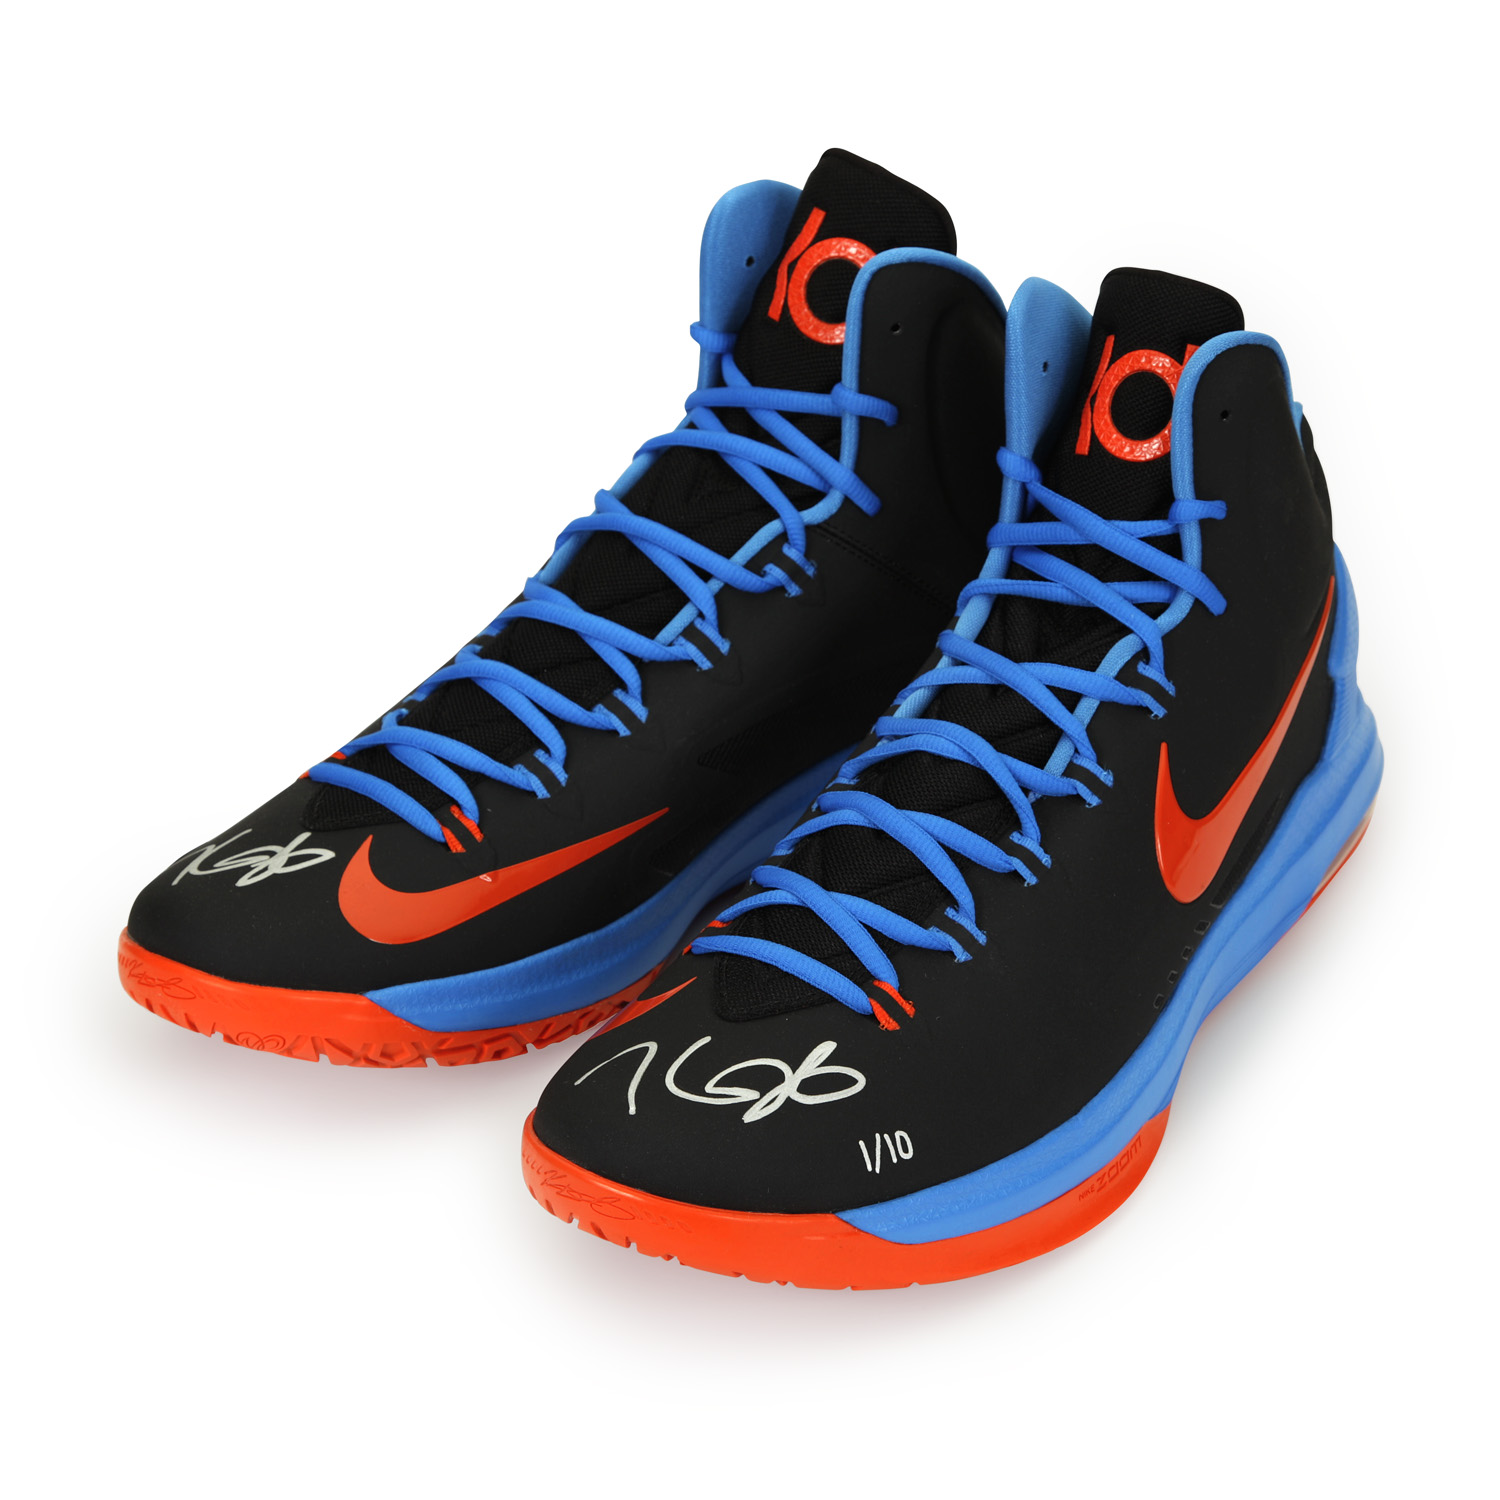 kevin durant signed shoes